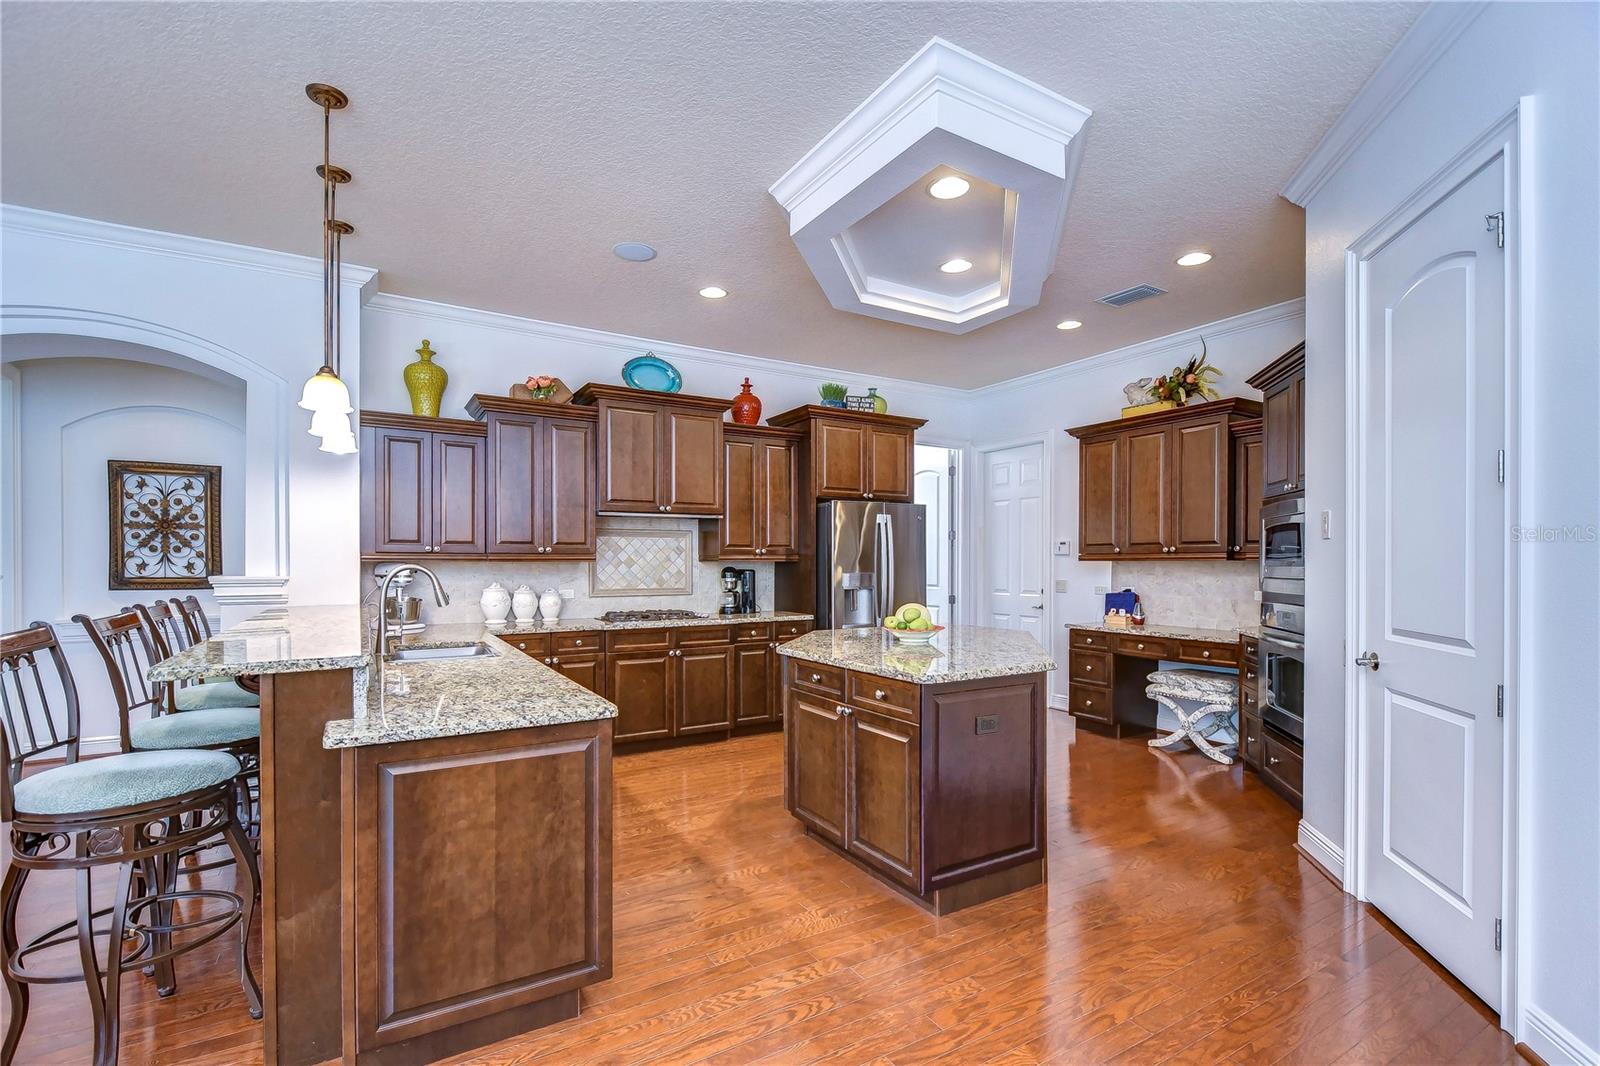 Granite countertops, updated stainless appliances including built-in a gas range and oven!